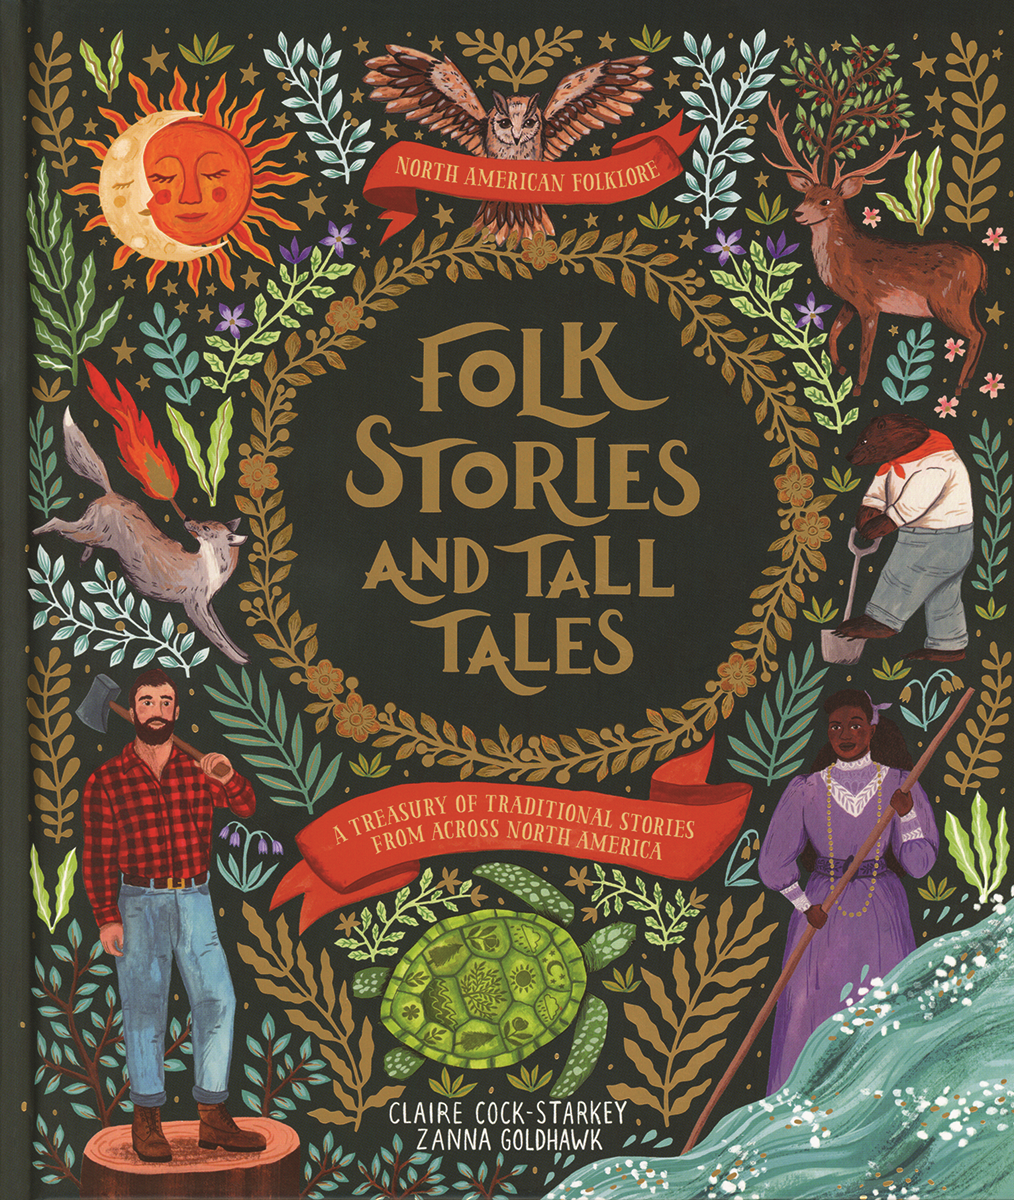 North American Folklore: Folk Stories and Tall Tales